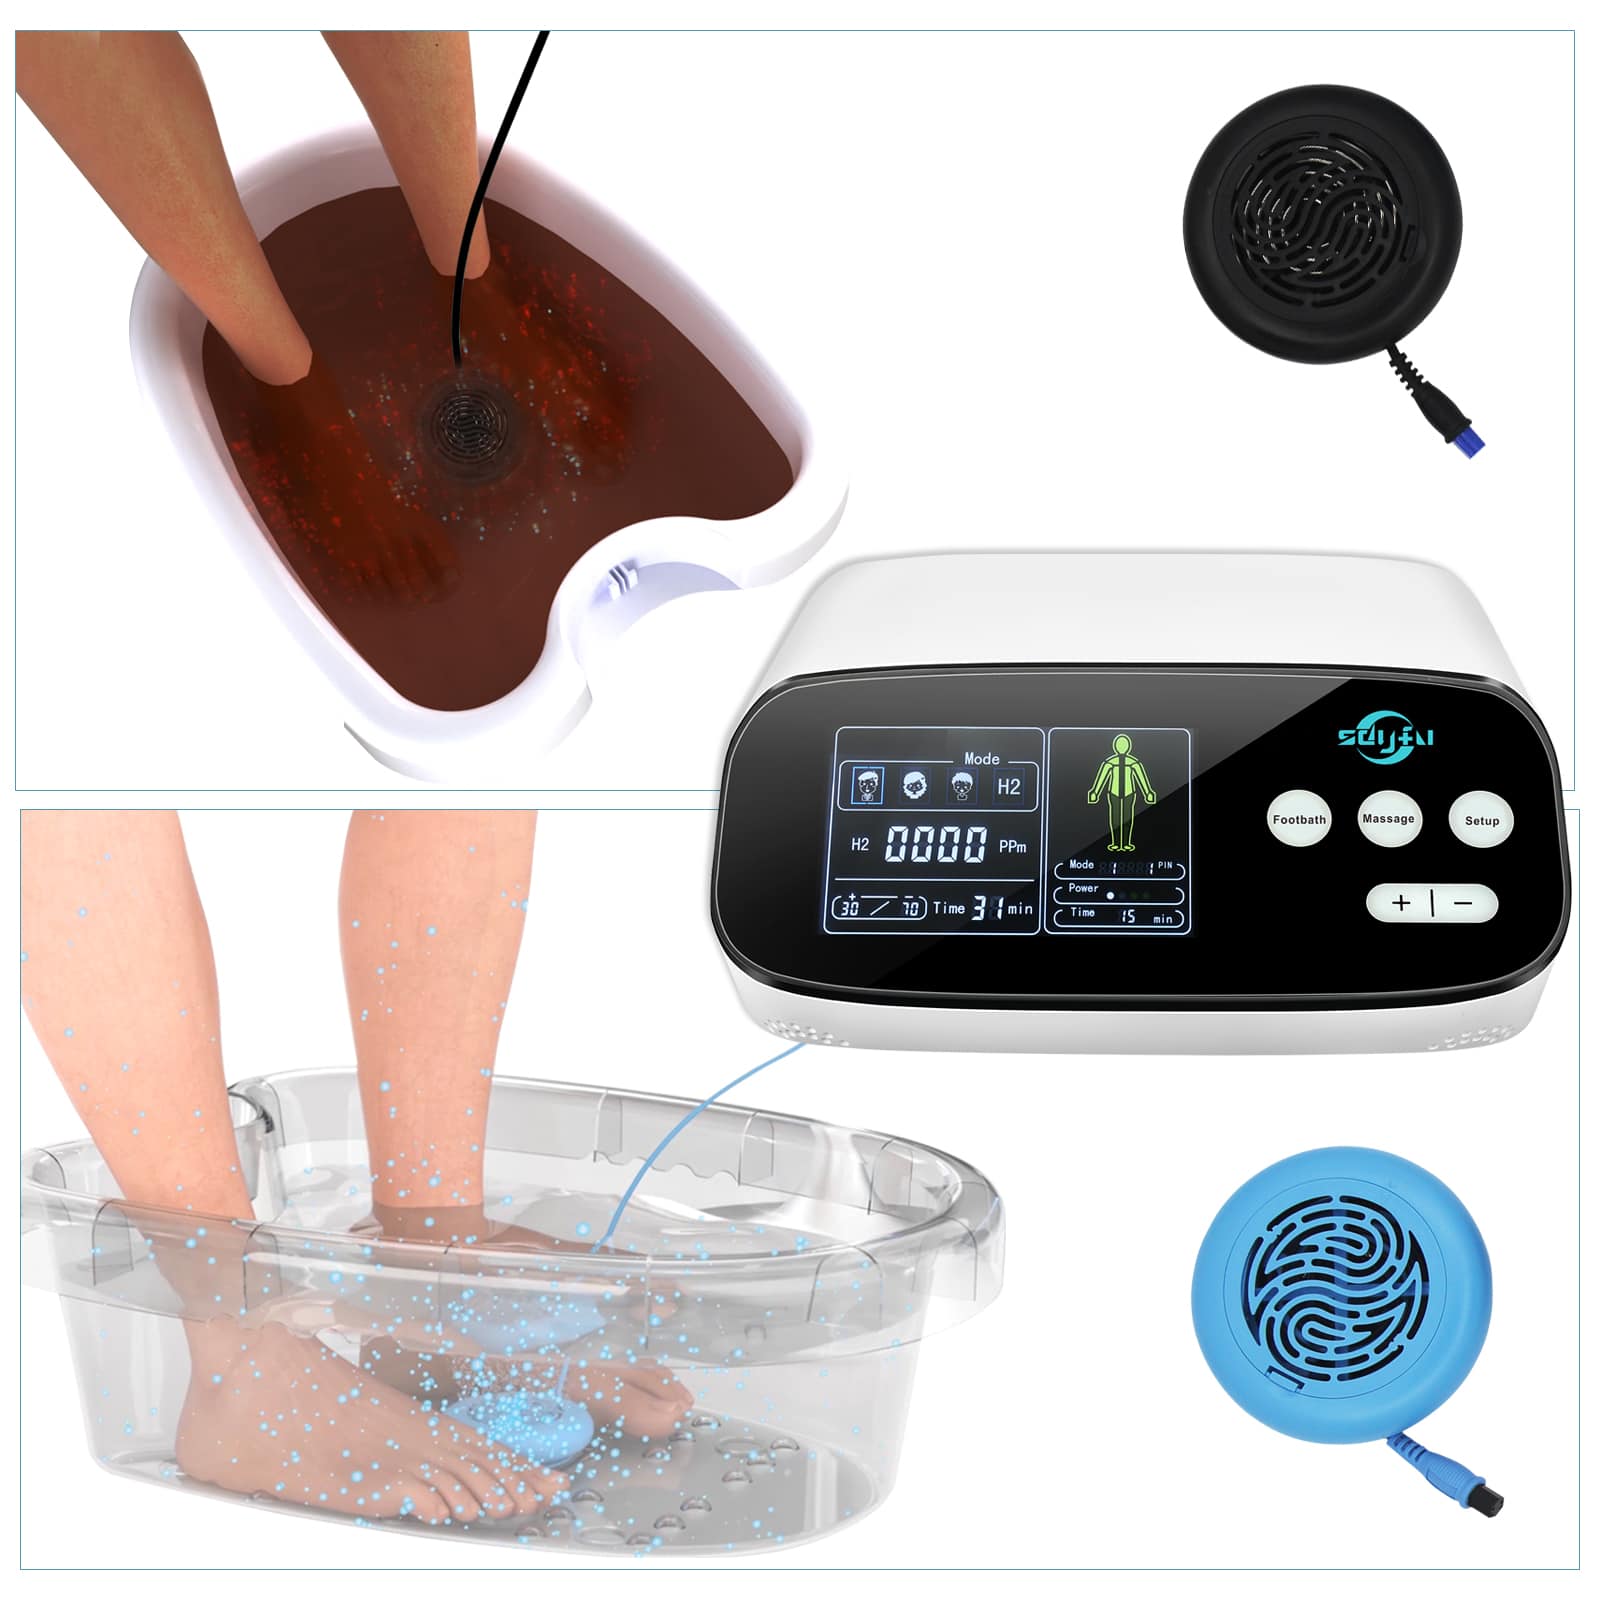 Hydrogen Water Machine for Body Bath and Facial Spa